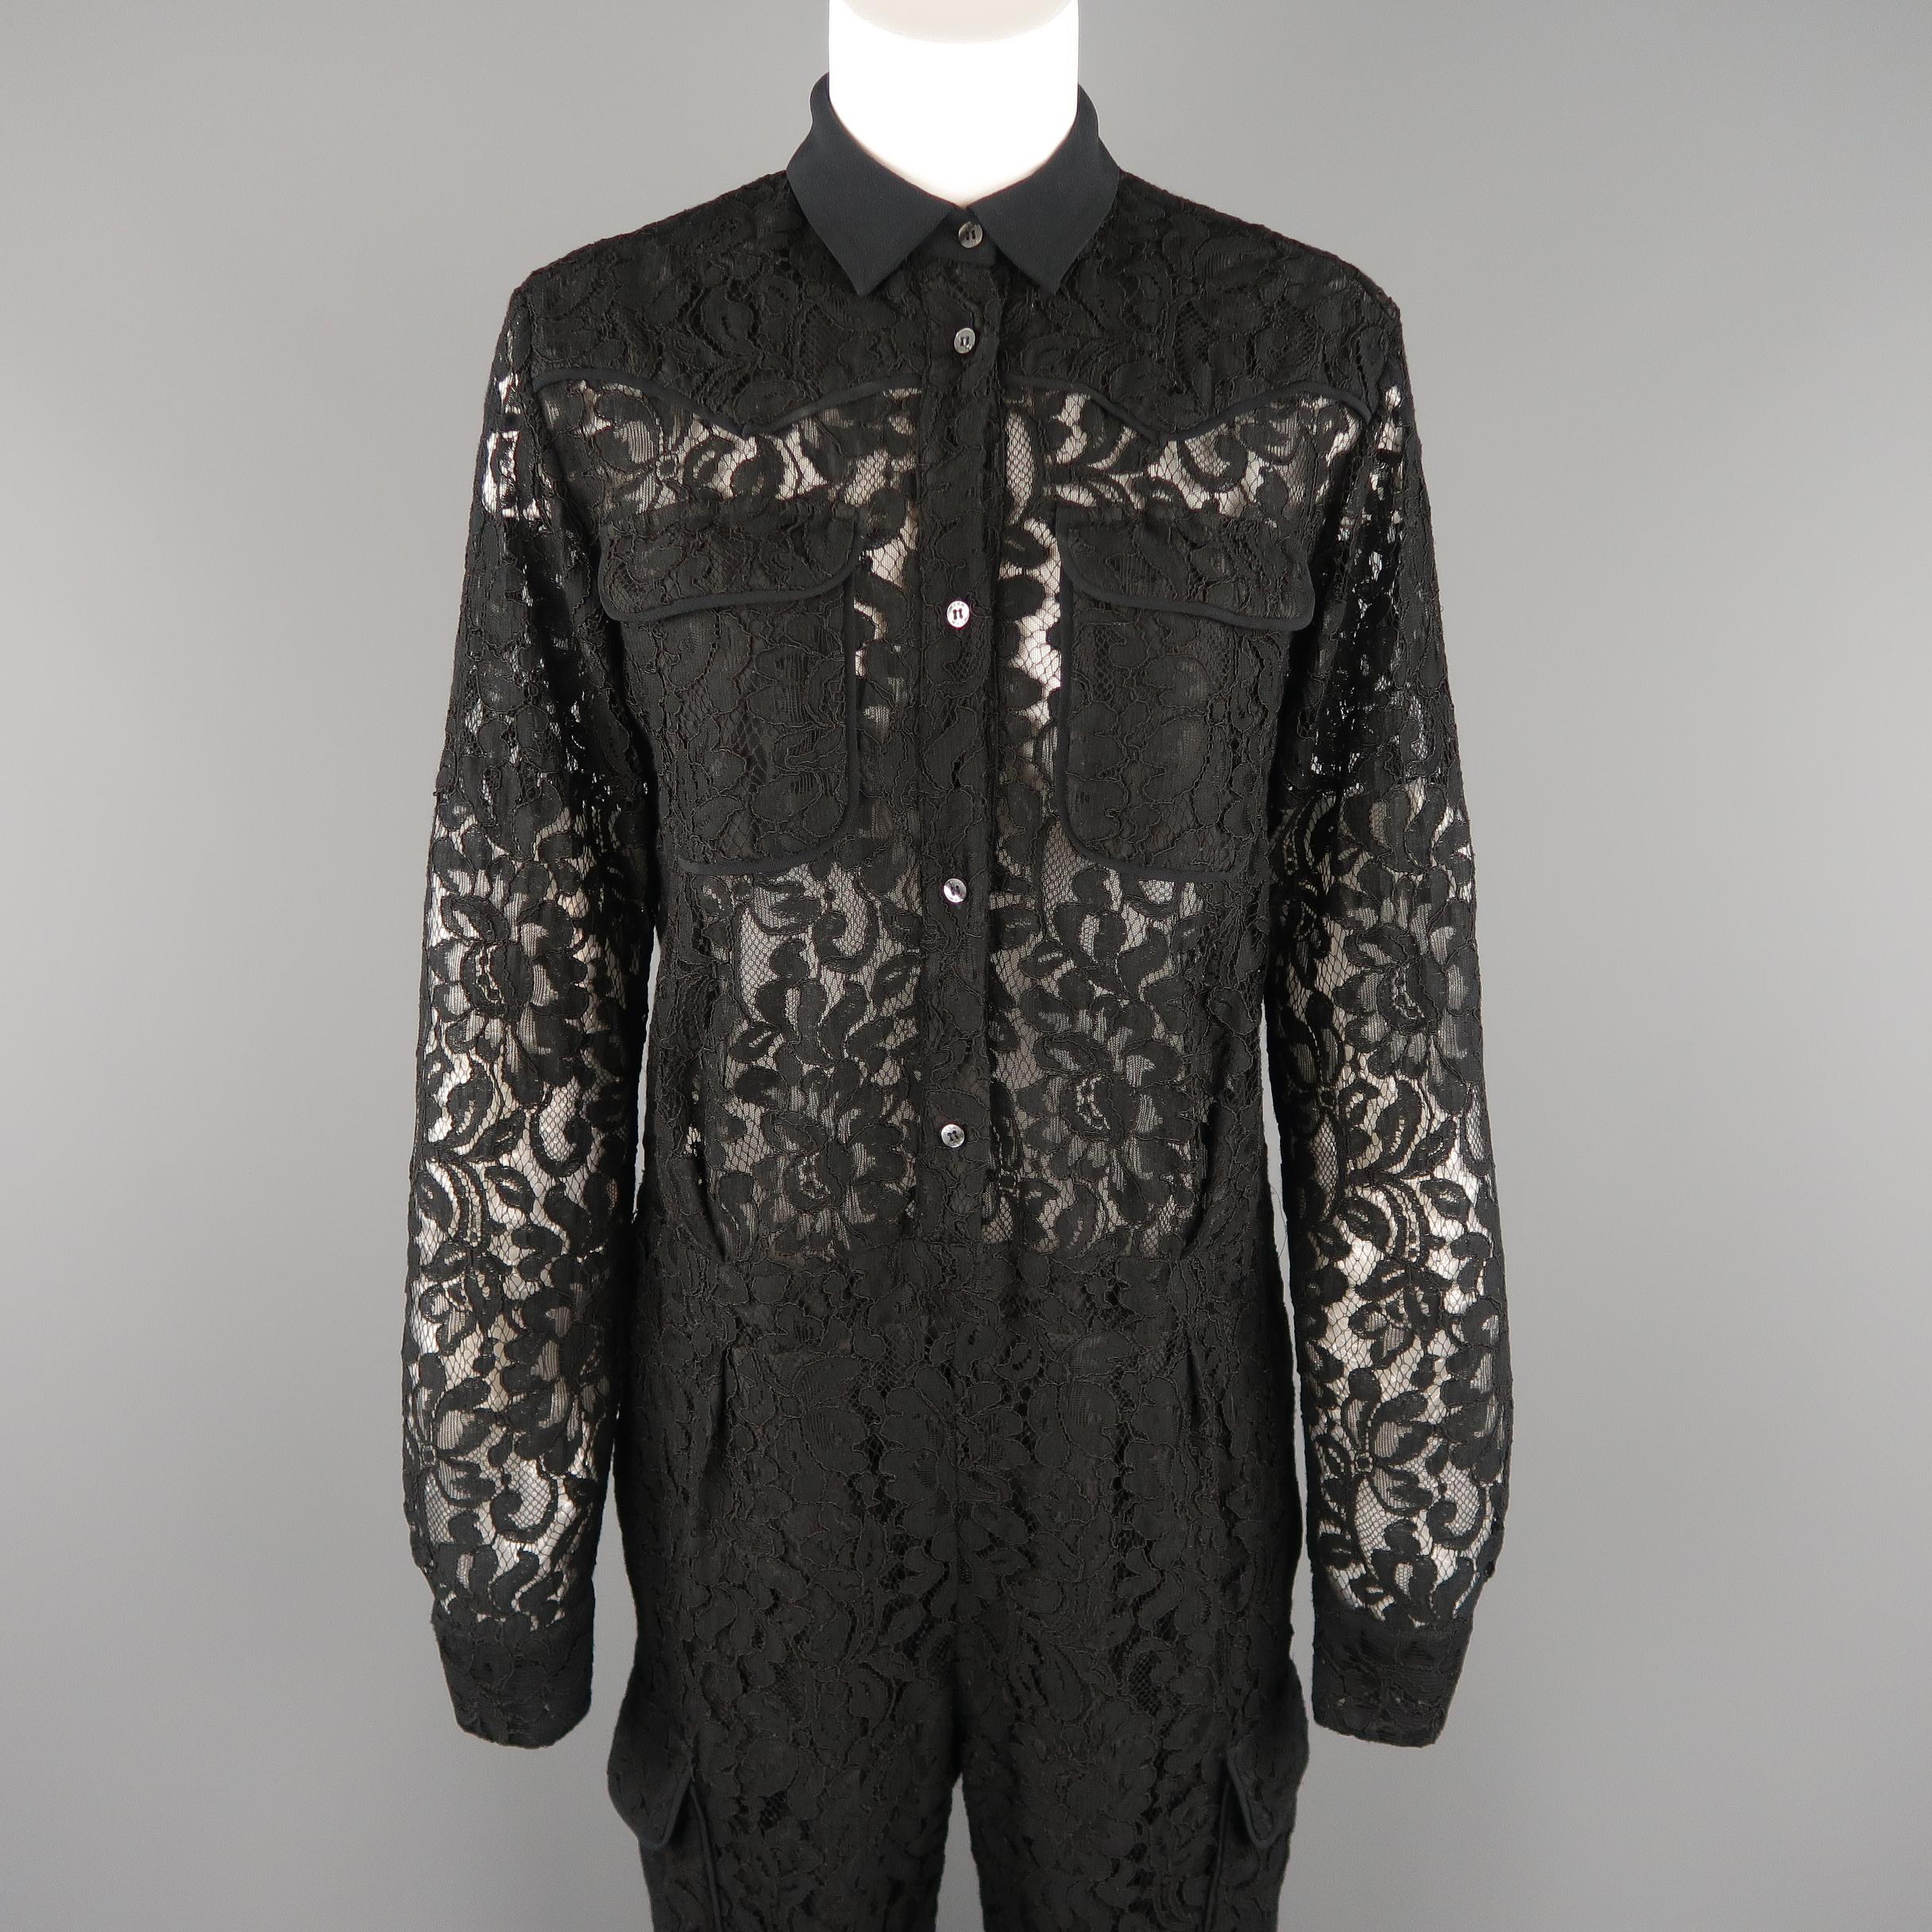 MSGM jumpsuit come sin black lace with a collared, western detailed shirt top and tapered leg pant bottom with cargo pockets. Made in Italy.
 
Excellent Pre-Owned Condition.
Marked: IT 40
 
Measurements:
 
Shoulder: 15 in.
Bust: 34 in.
Waist: 32